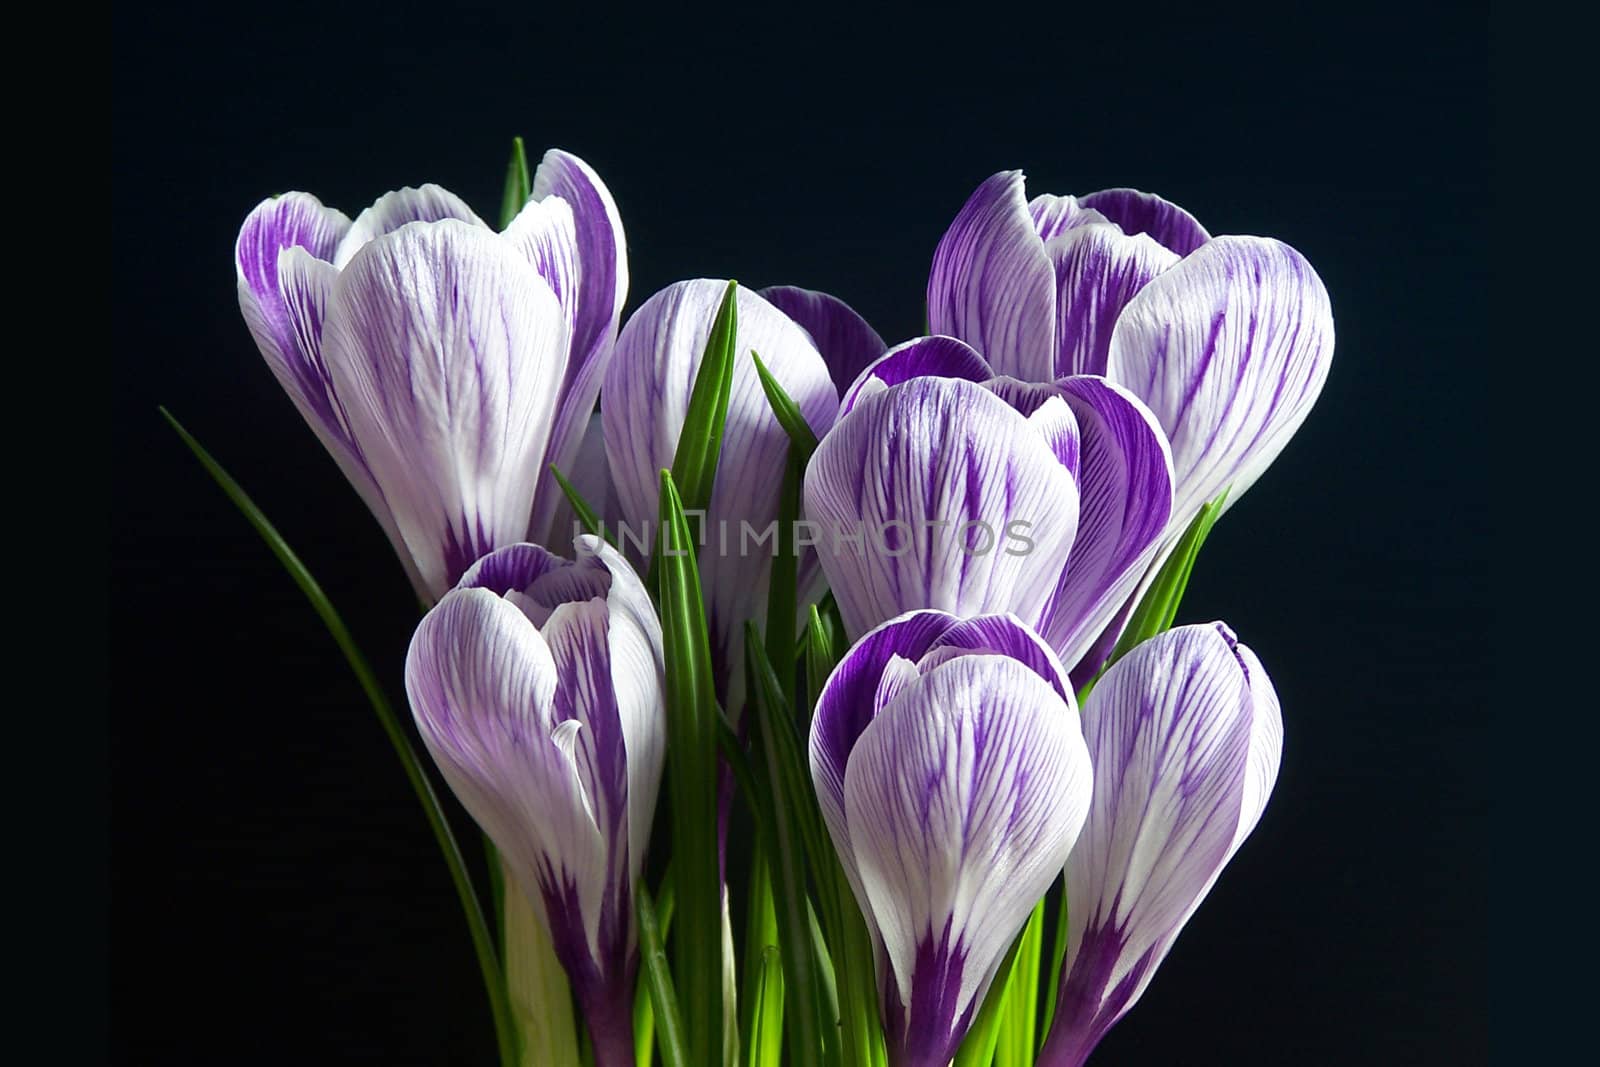 Violet and white Pickwick crocuses on the black background